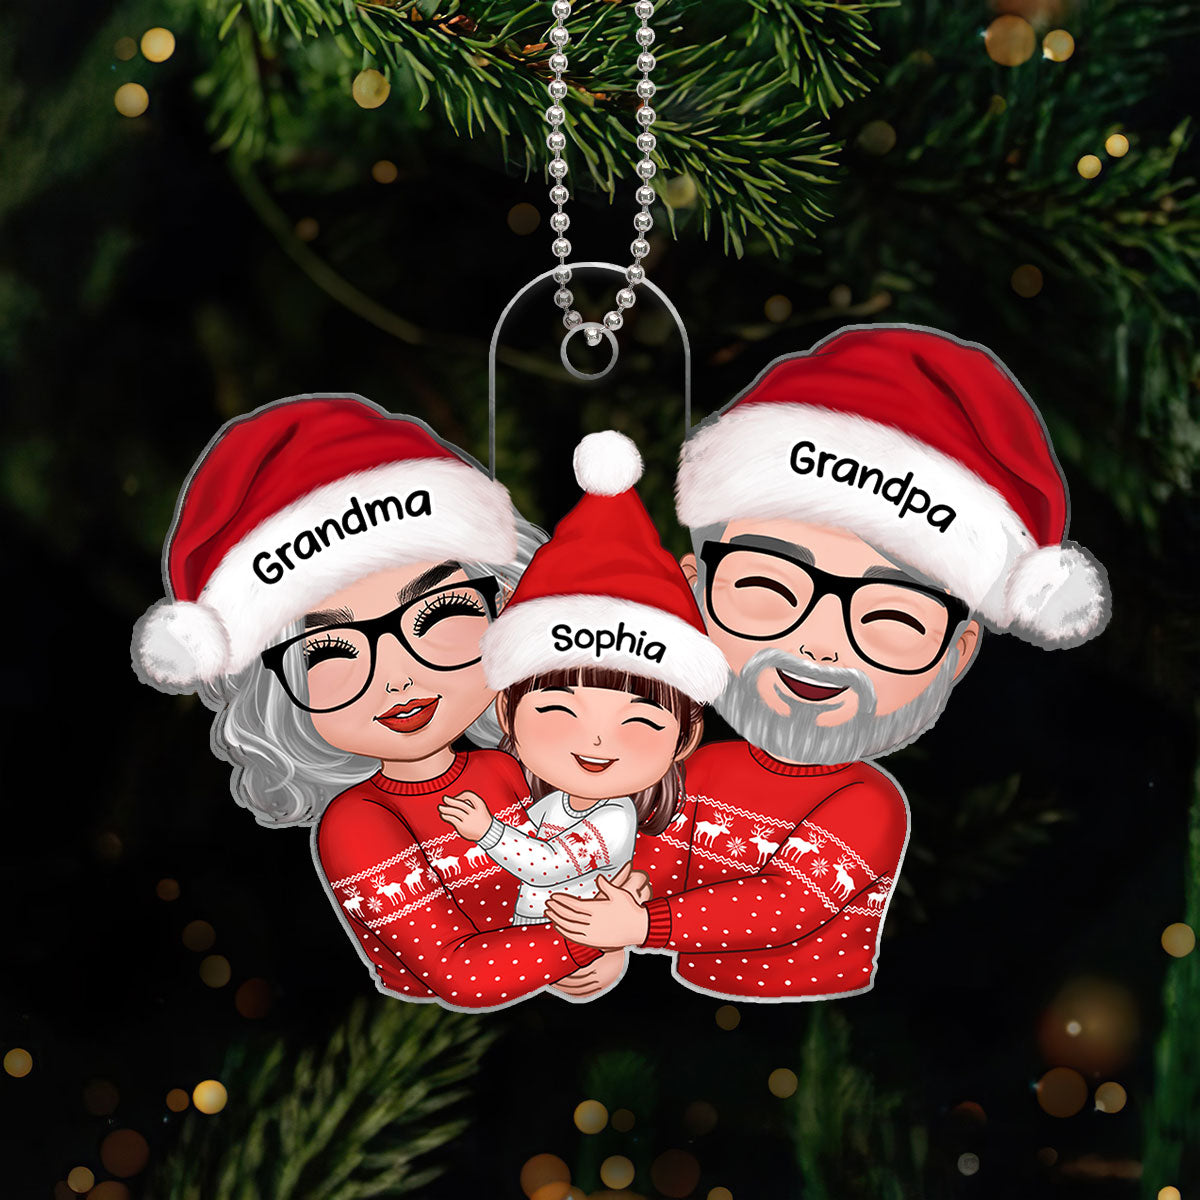 Christmas Ornaments From Grandparents To Grandkid